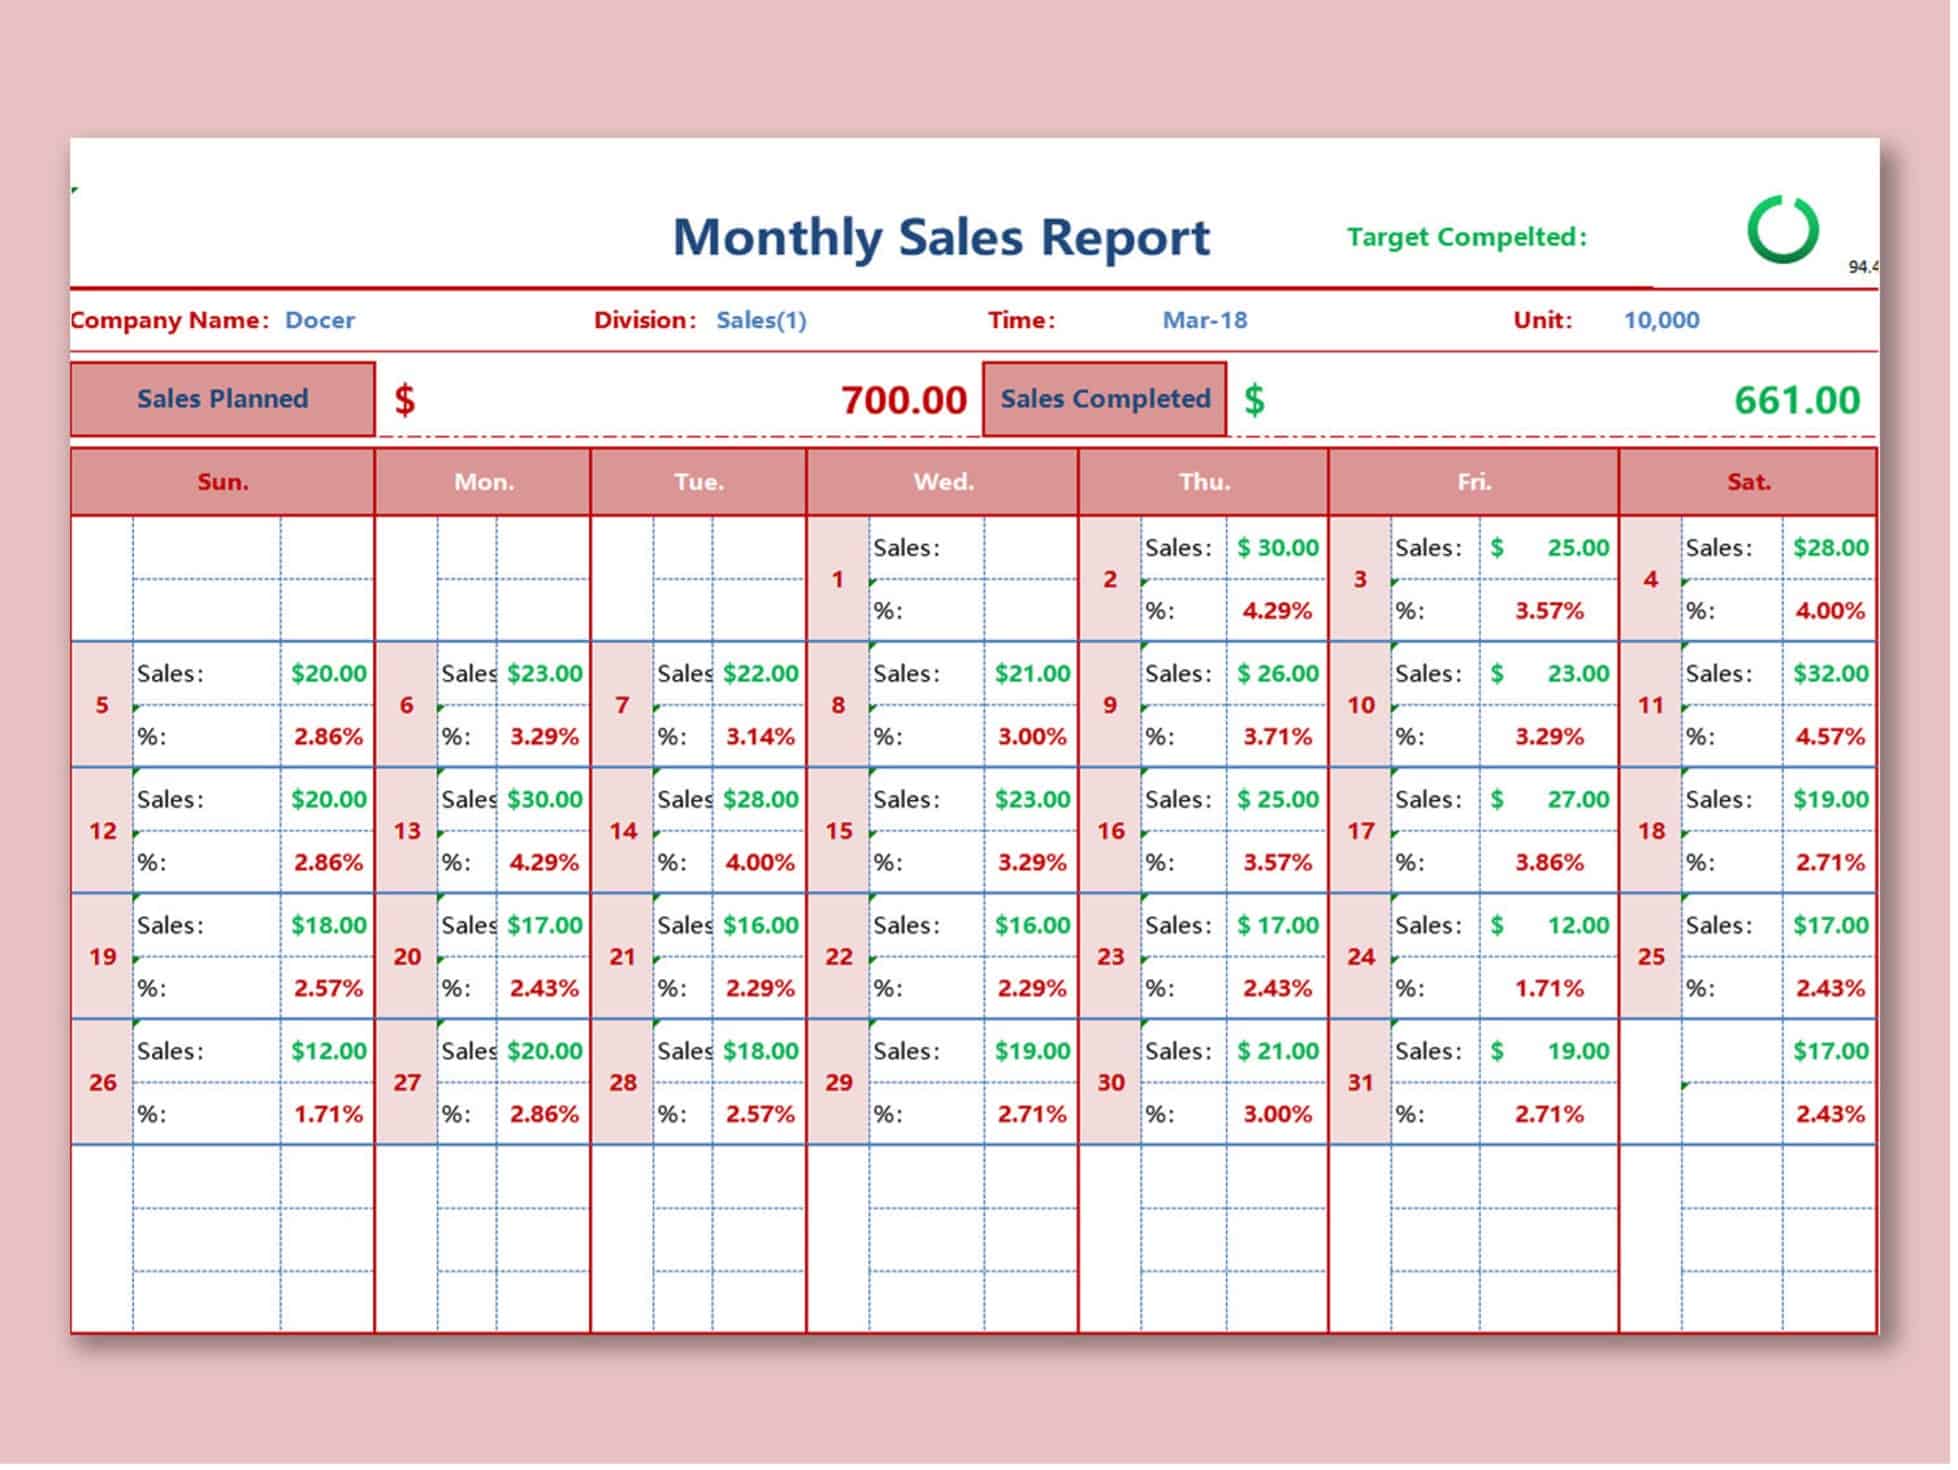 Monthly sales report sample by WPS 